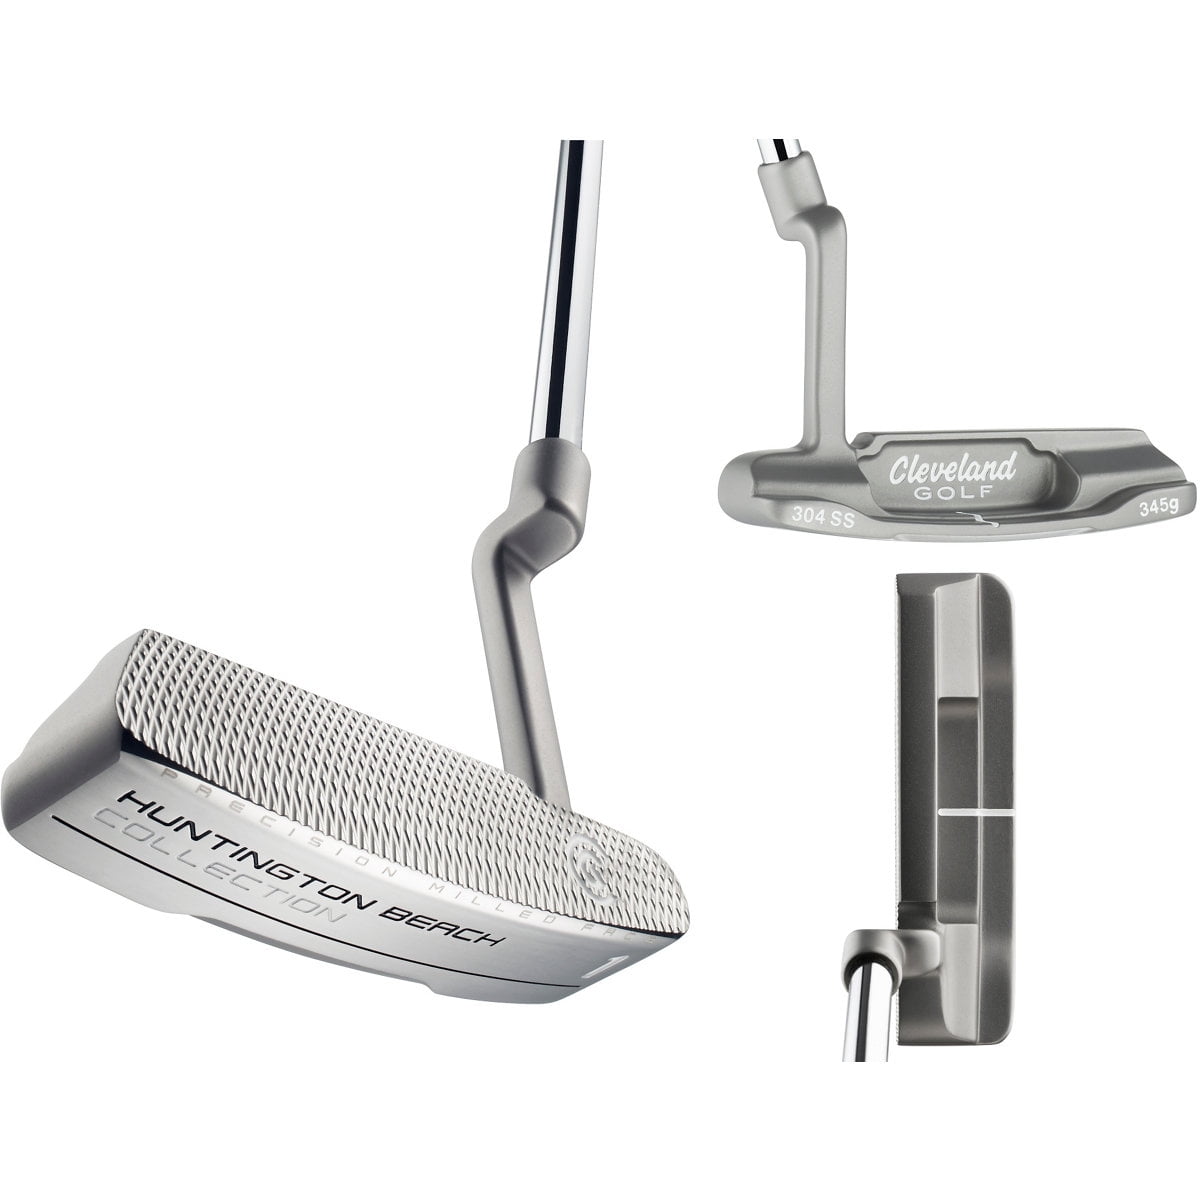 Cheap Milled blade putters? OR Smaller and Cheaper putter companies out ...